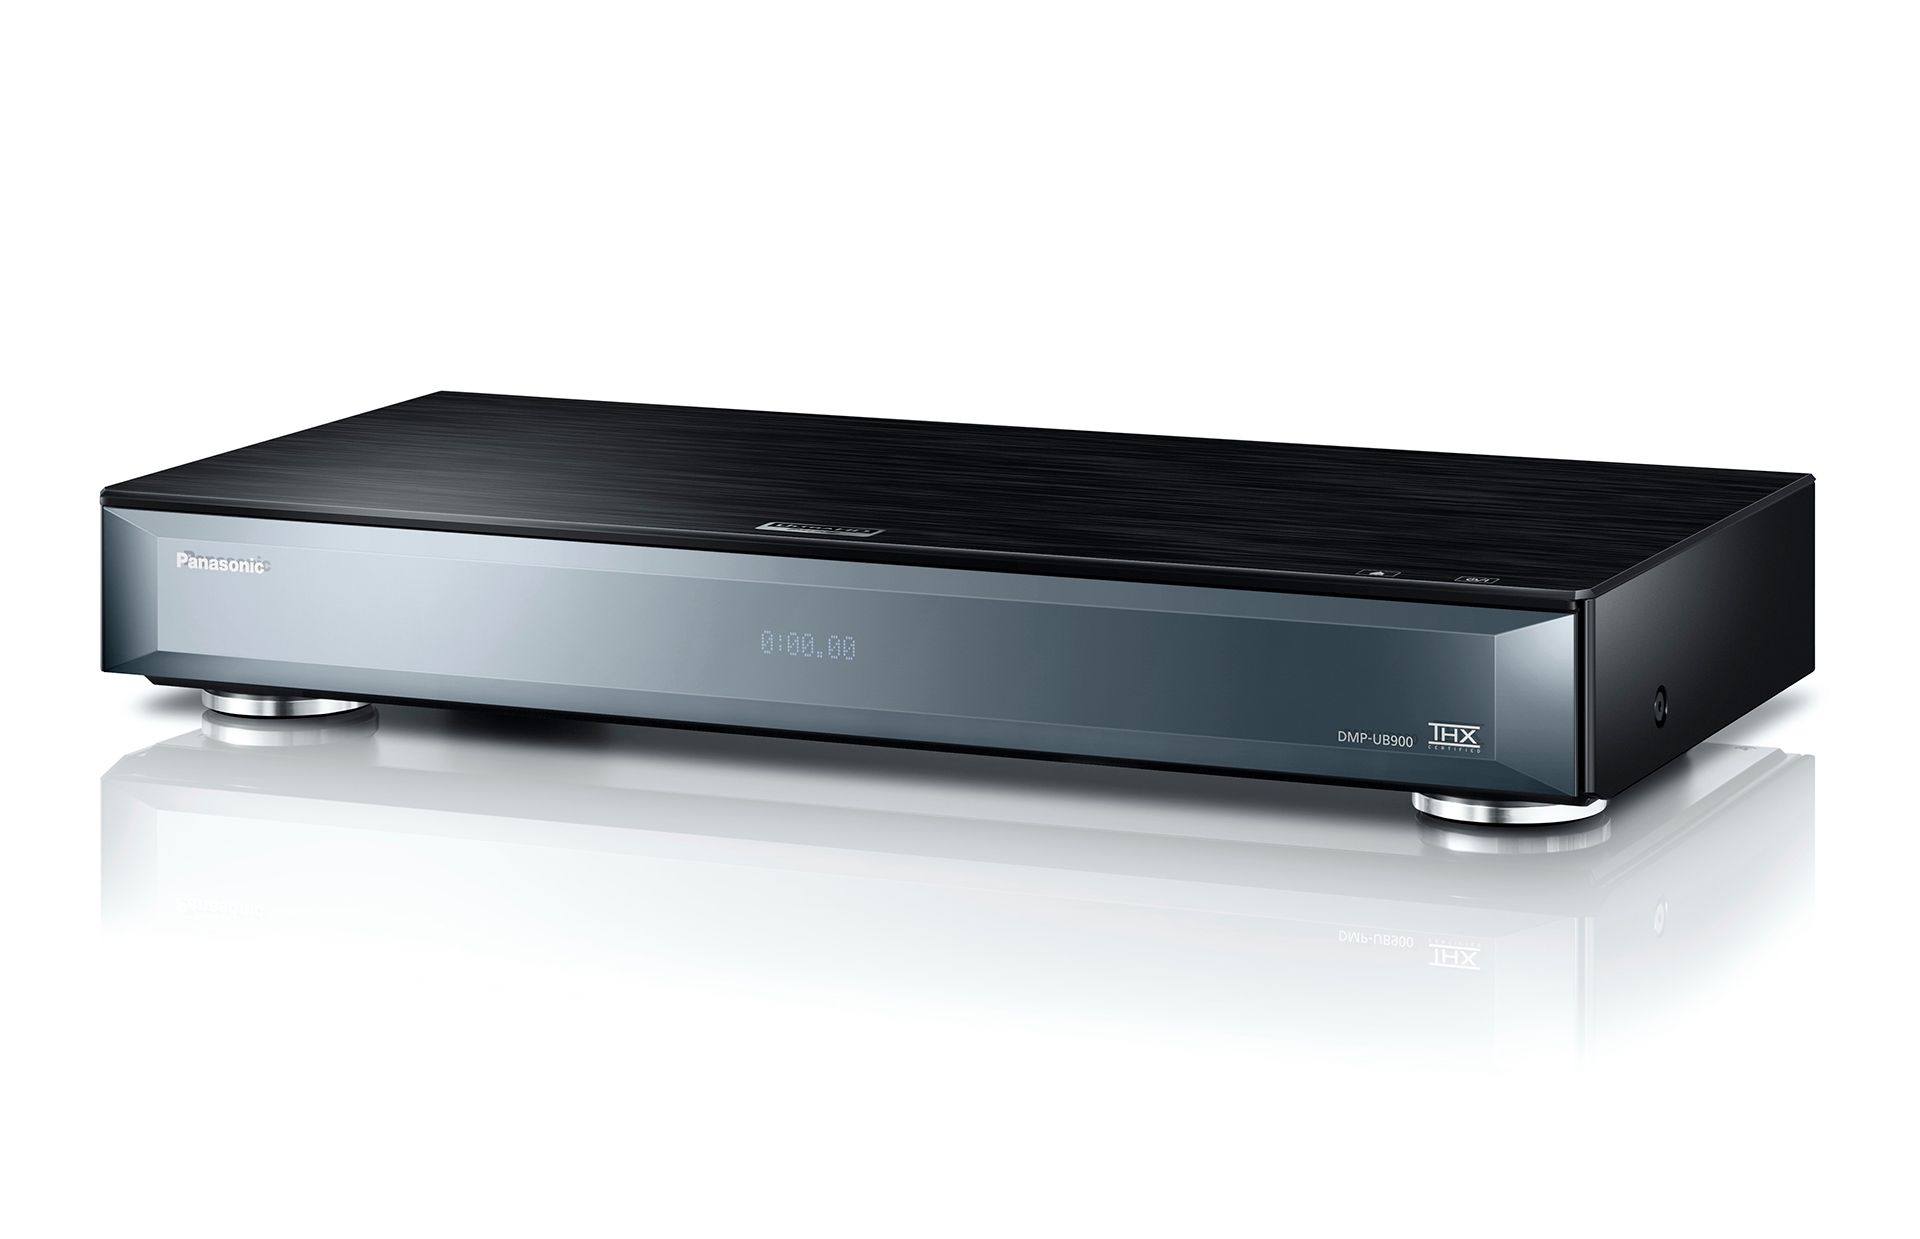 uhd blu ray players are finally here panasonic enters 4k disc market with dmp ub900 image 1